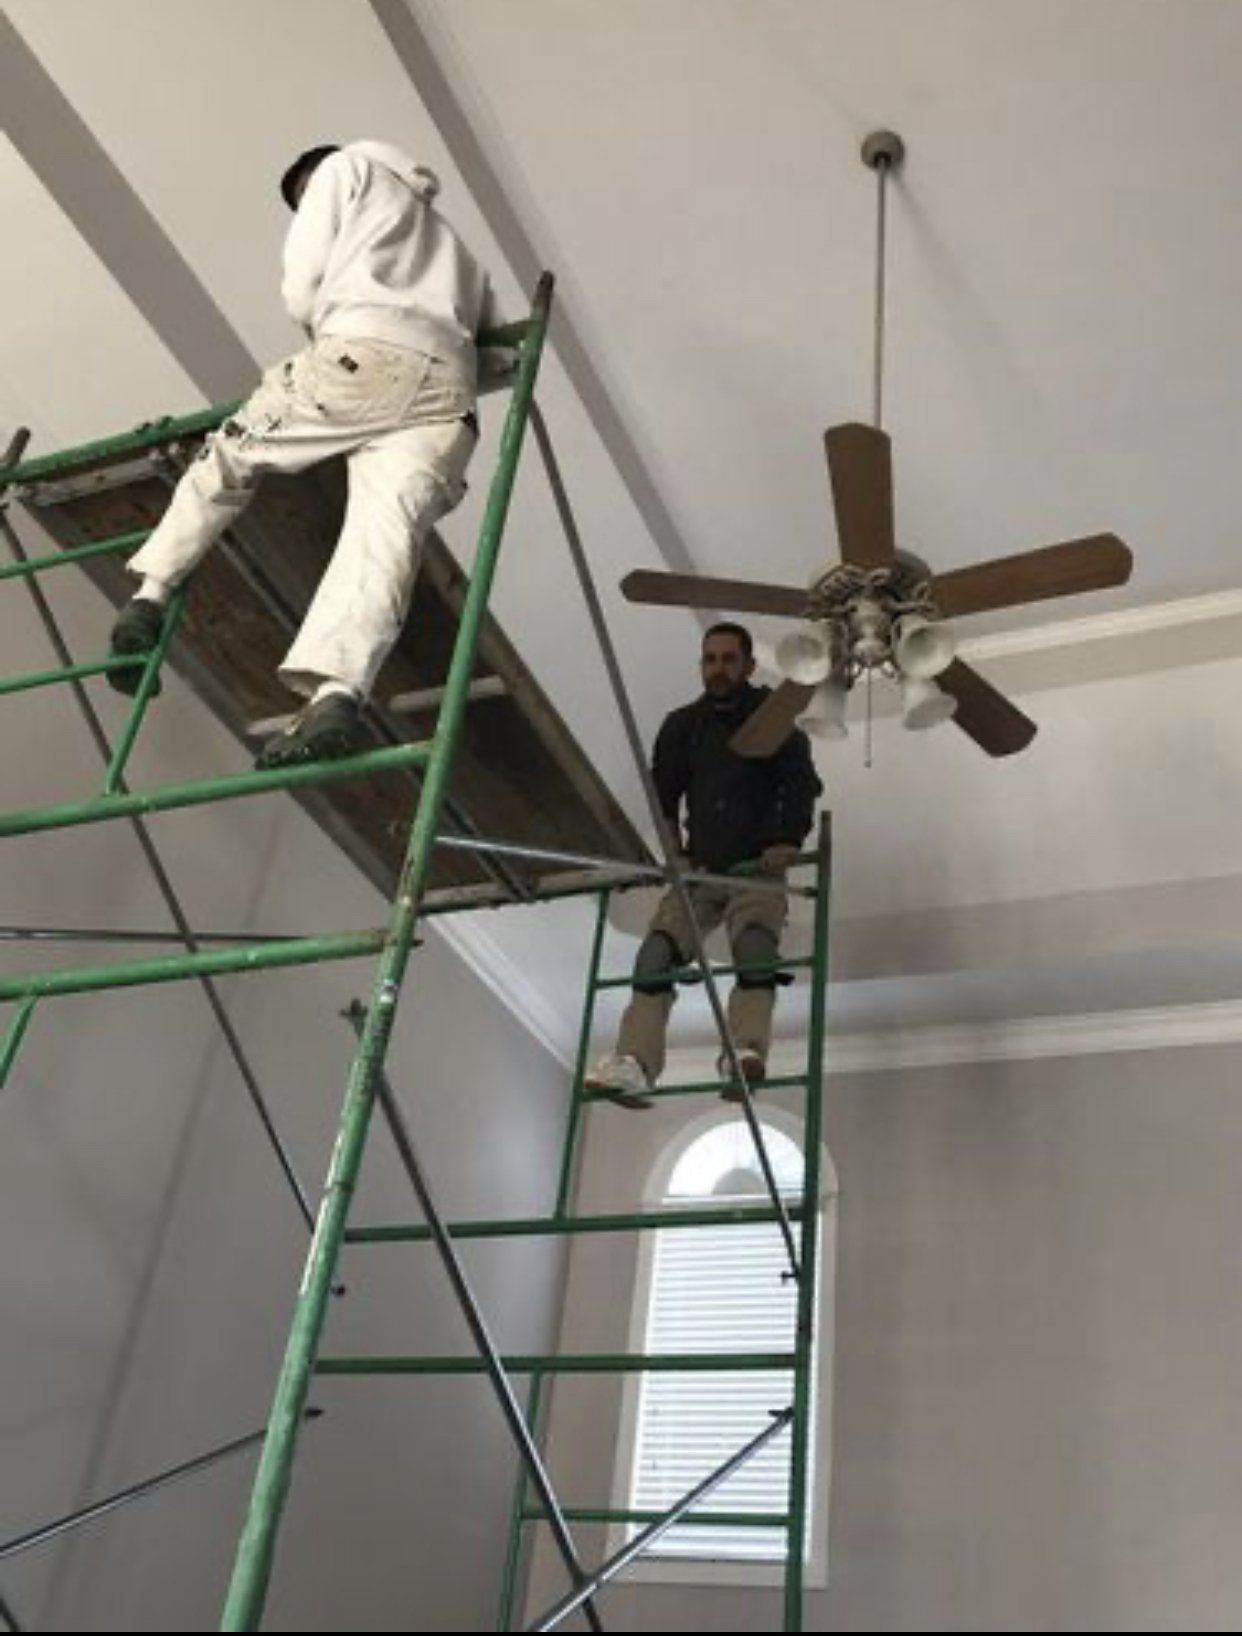 ceiling painting